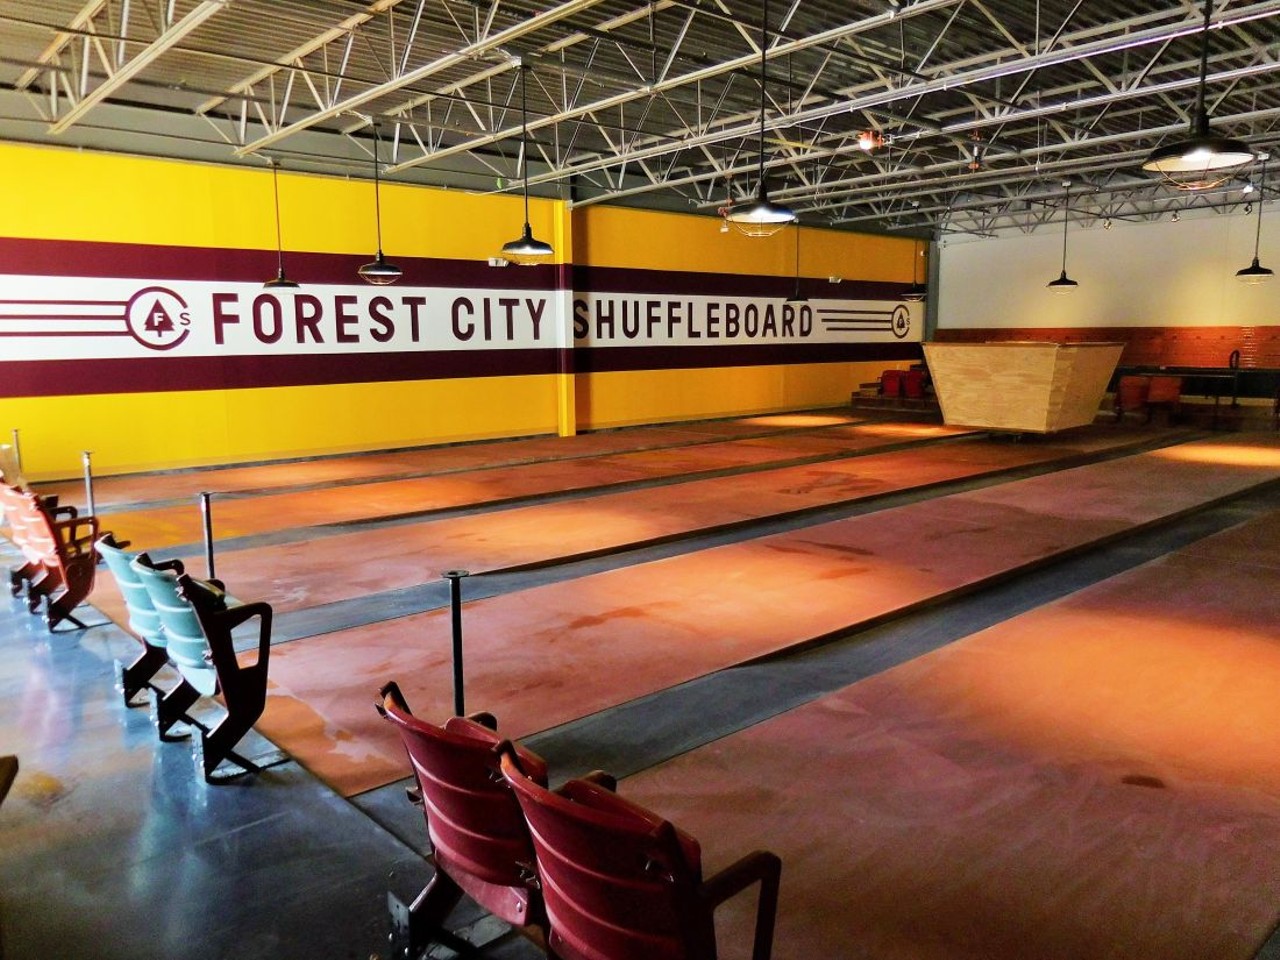  Forest City Shuffleboard
4506 Lorain Ave.
After nearly a year of construction, Jim Miketo is putting the finishing touches on Forest City Shuffleboard Arena and Bar, a gorgeous new entertainment option on the Ohio City-Detroit Shoreway border. A complete gut-and-rebuild job on the former Supermercado Rico building on Lorain at West 45th has produced a spacious, but comfortable social club with indoor shuffleboard, bar and kitchen. The business is now open.
Douglas Trattner Photo